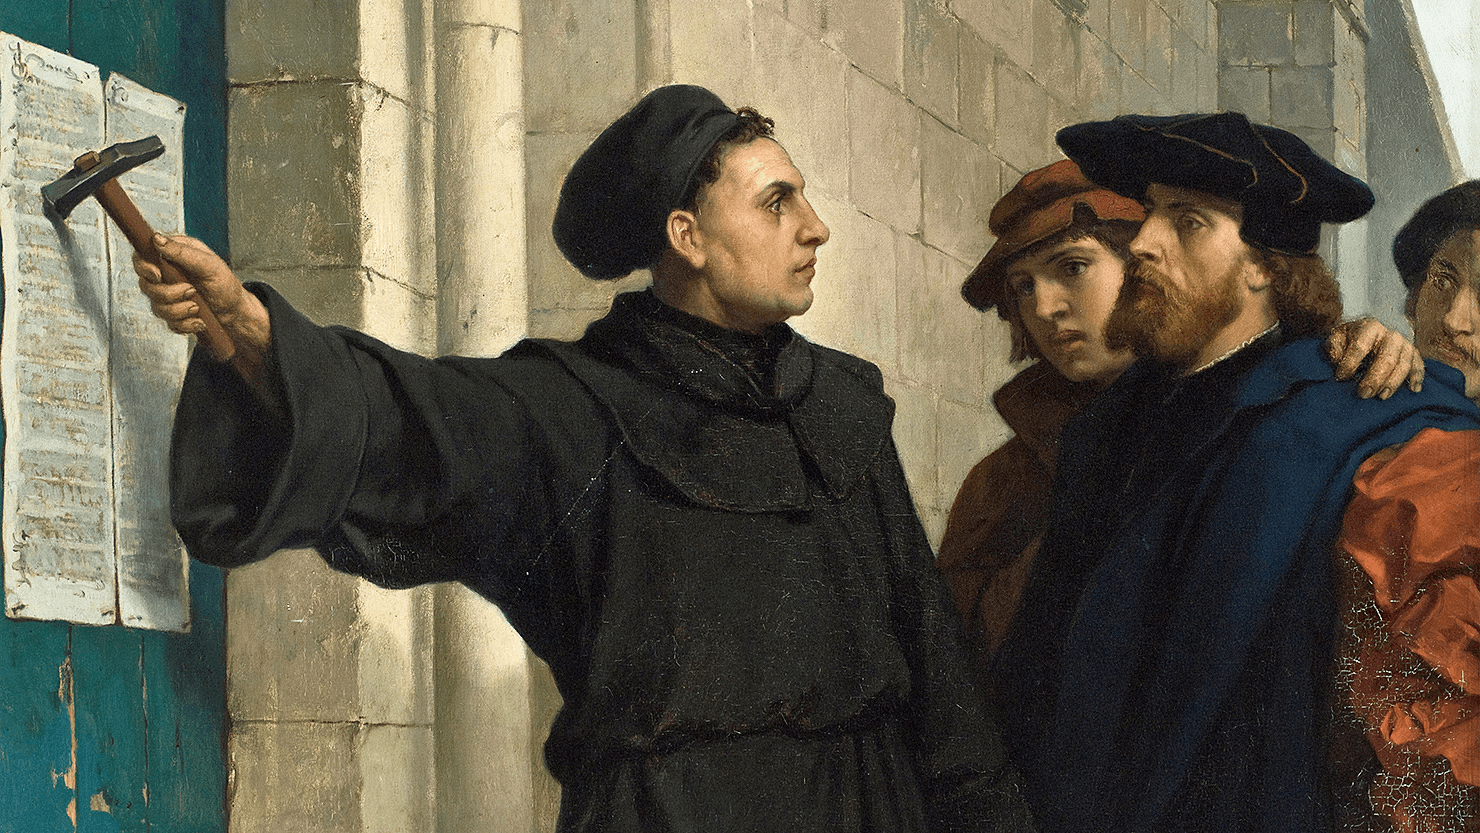 EVANGELISM MONTH AND 500 YEARS OF REFORMATION